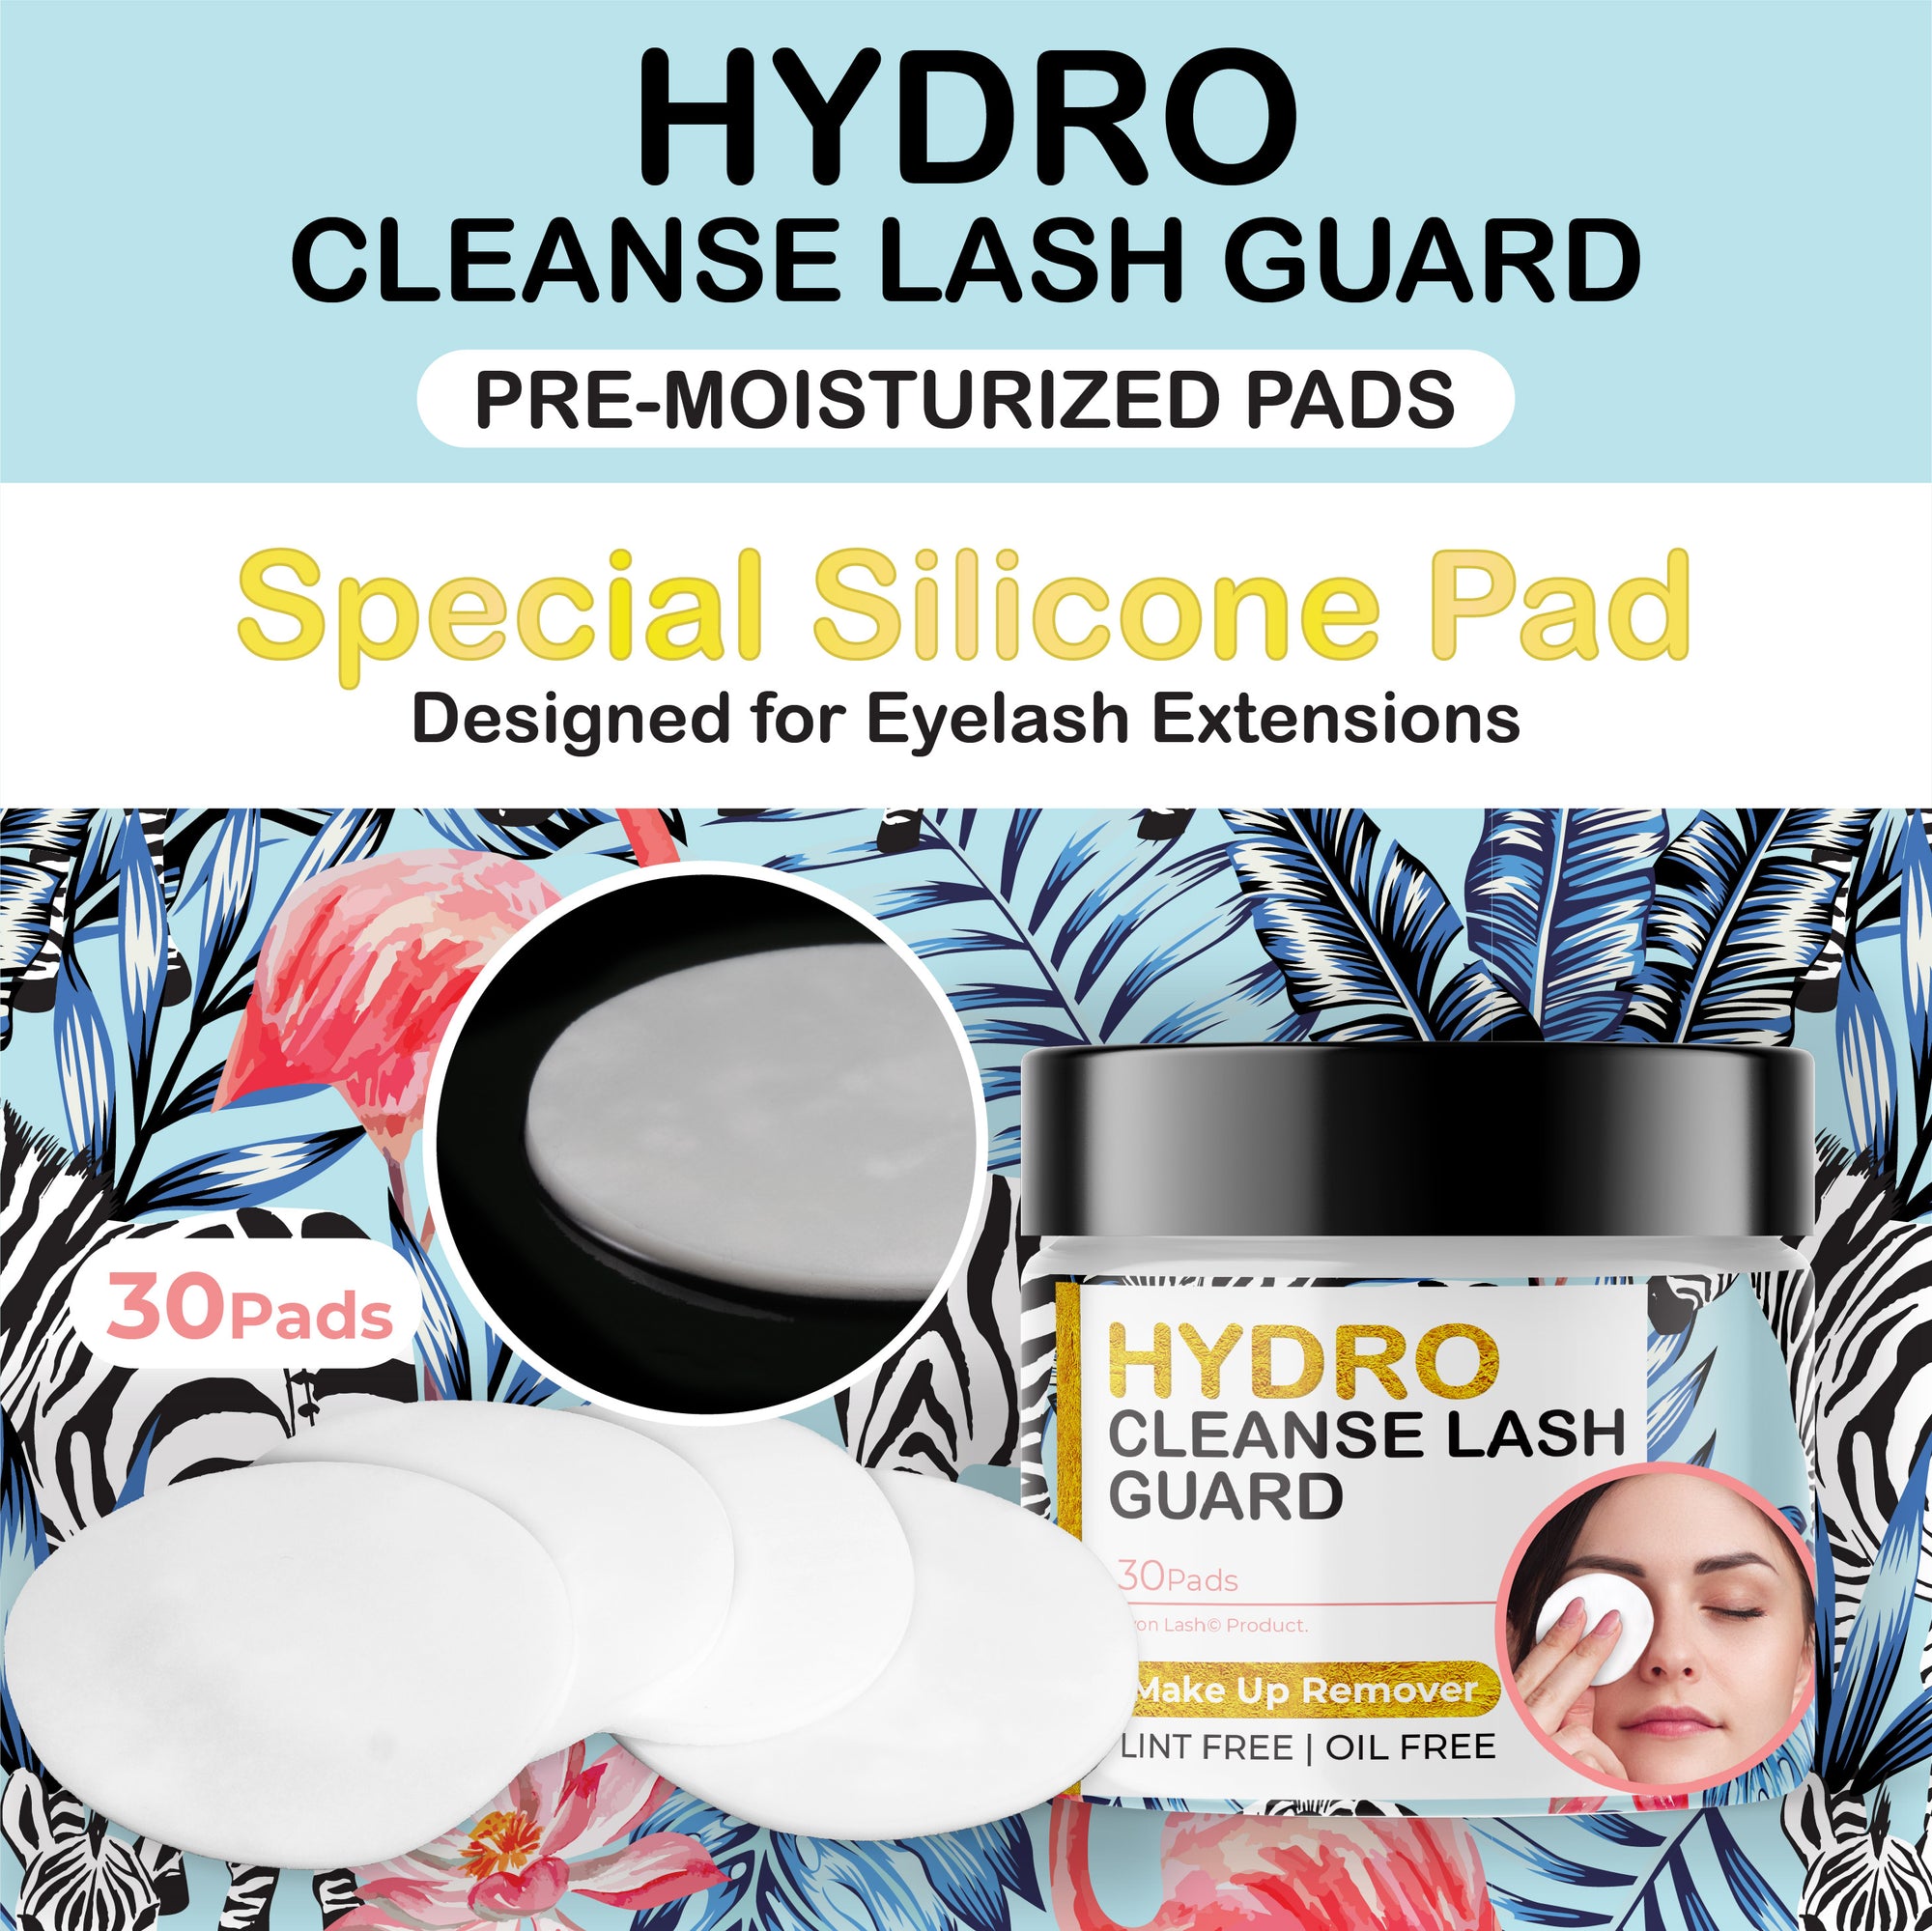 Hydro Cleanse Lash Guard - Make Up Remover Pads (Wholesale)